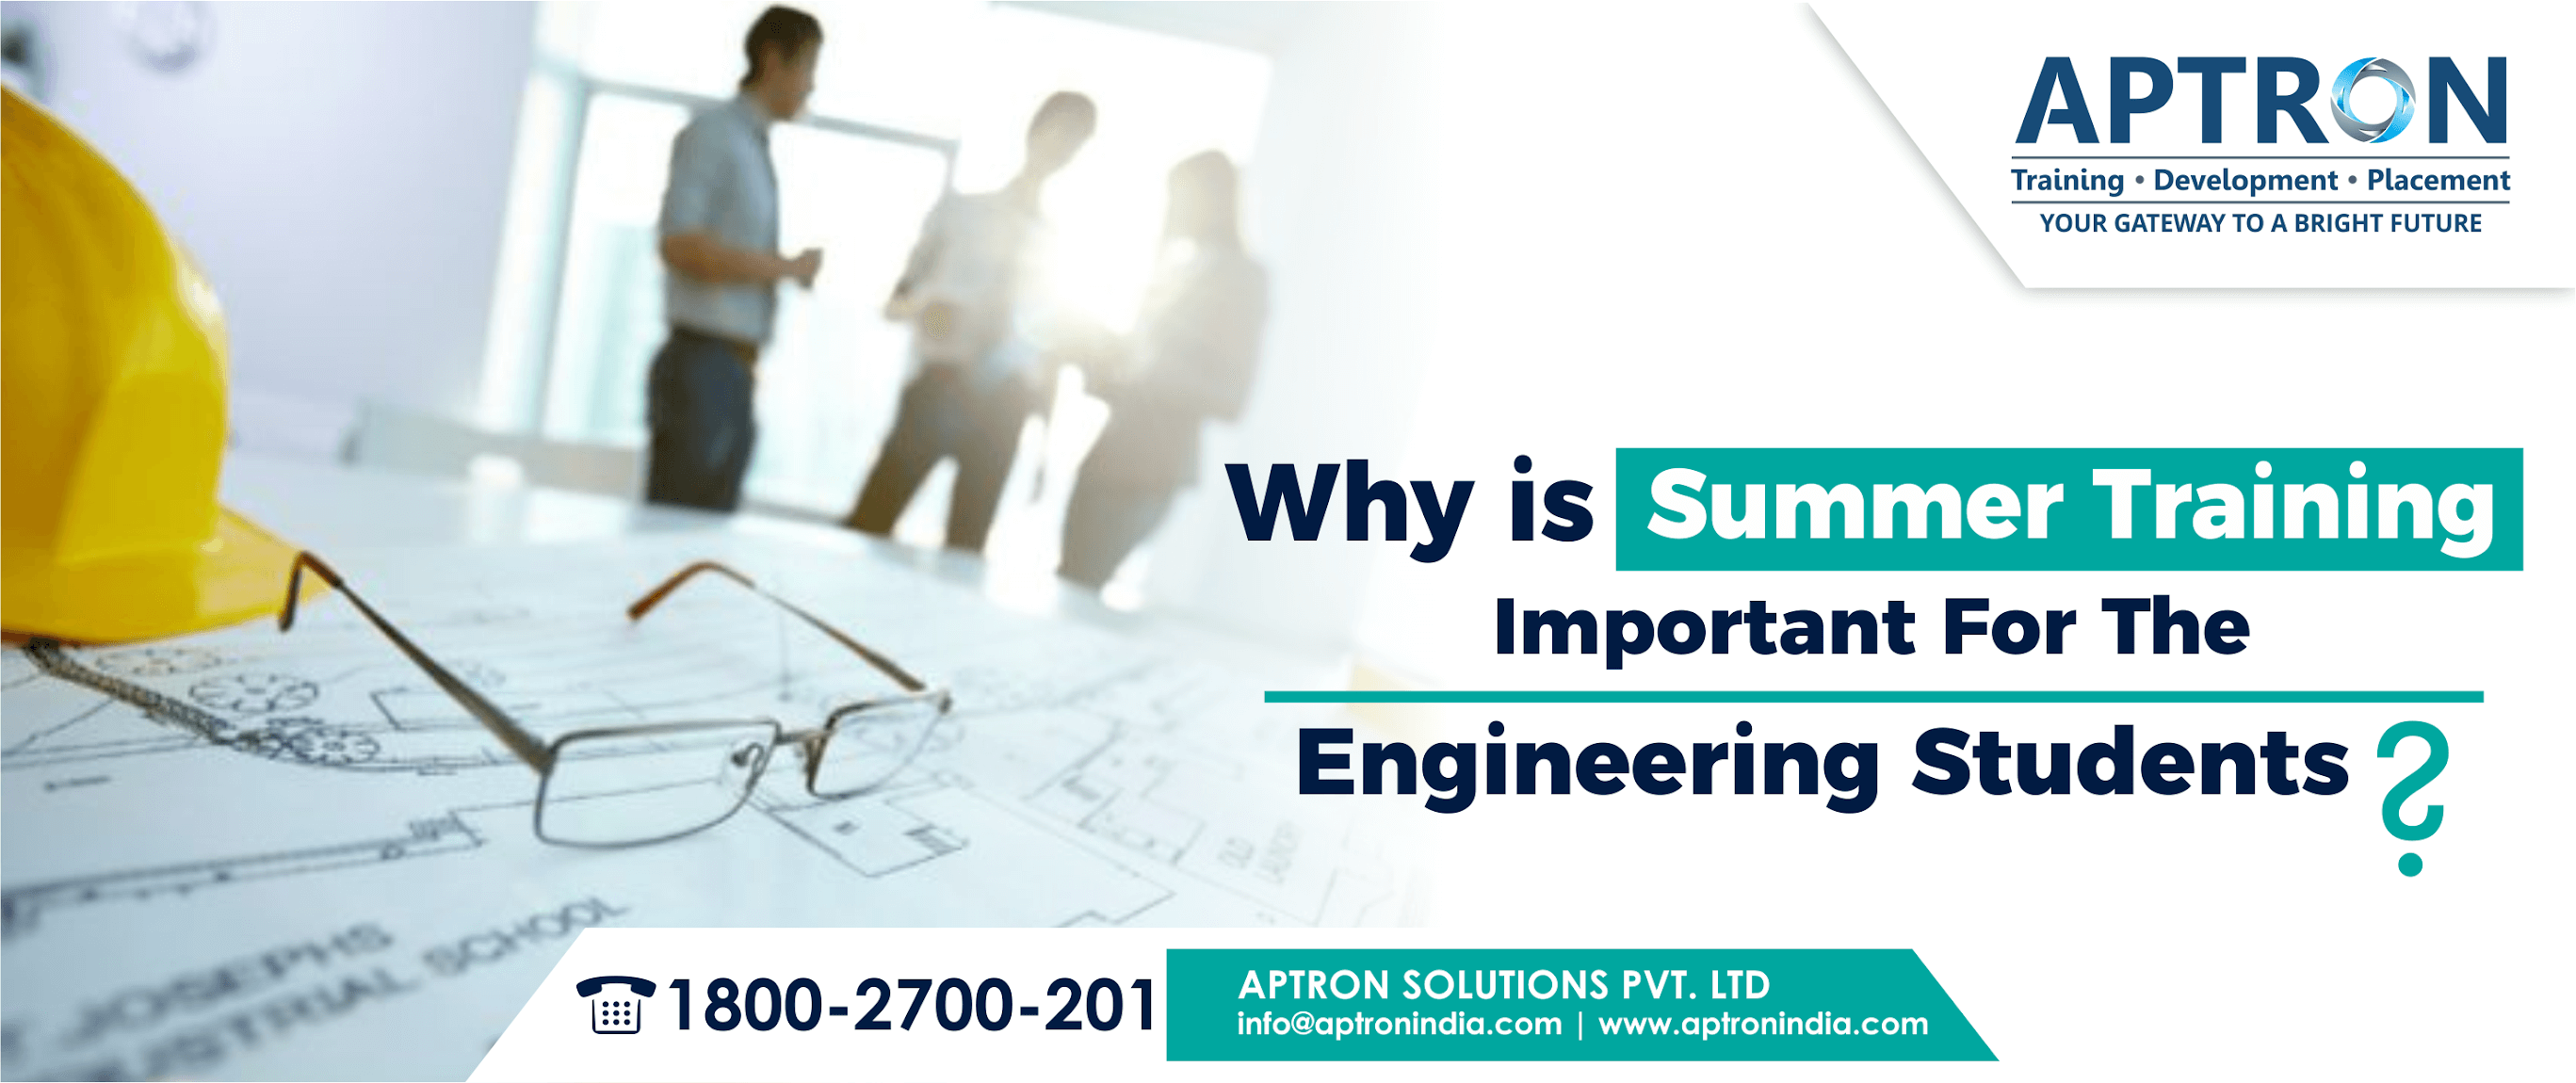 Why is summer training important for the engineering students